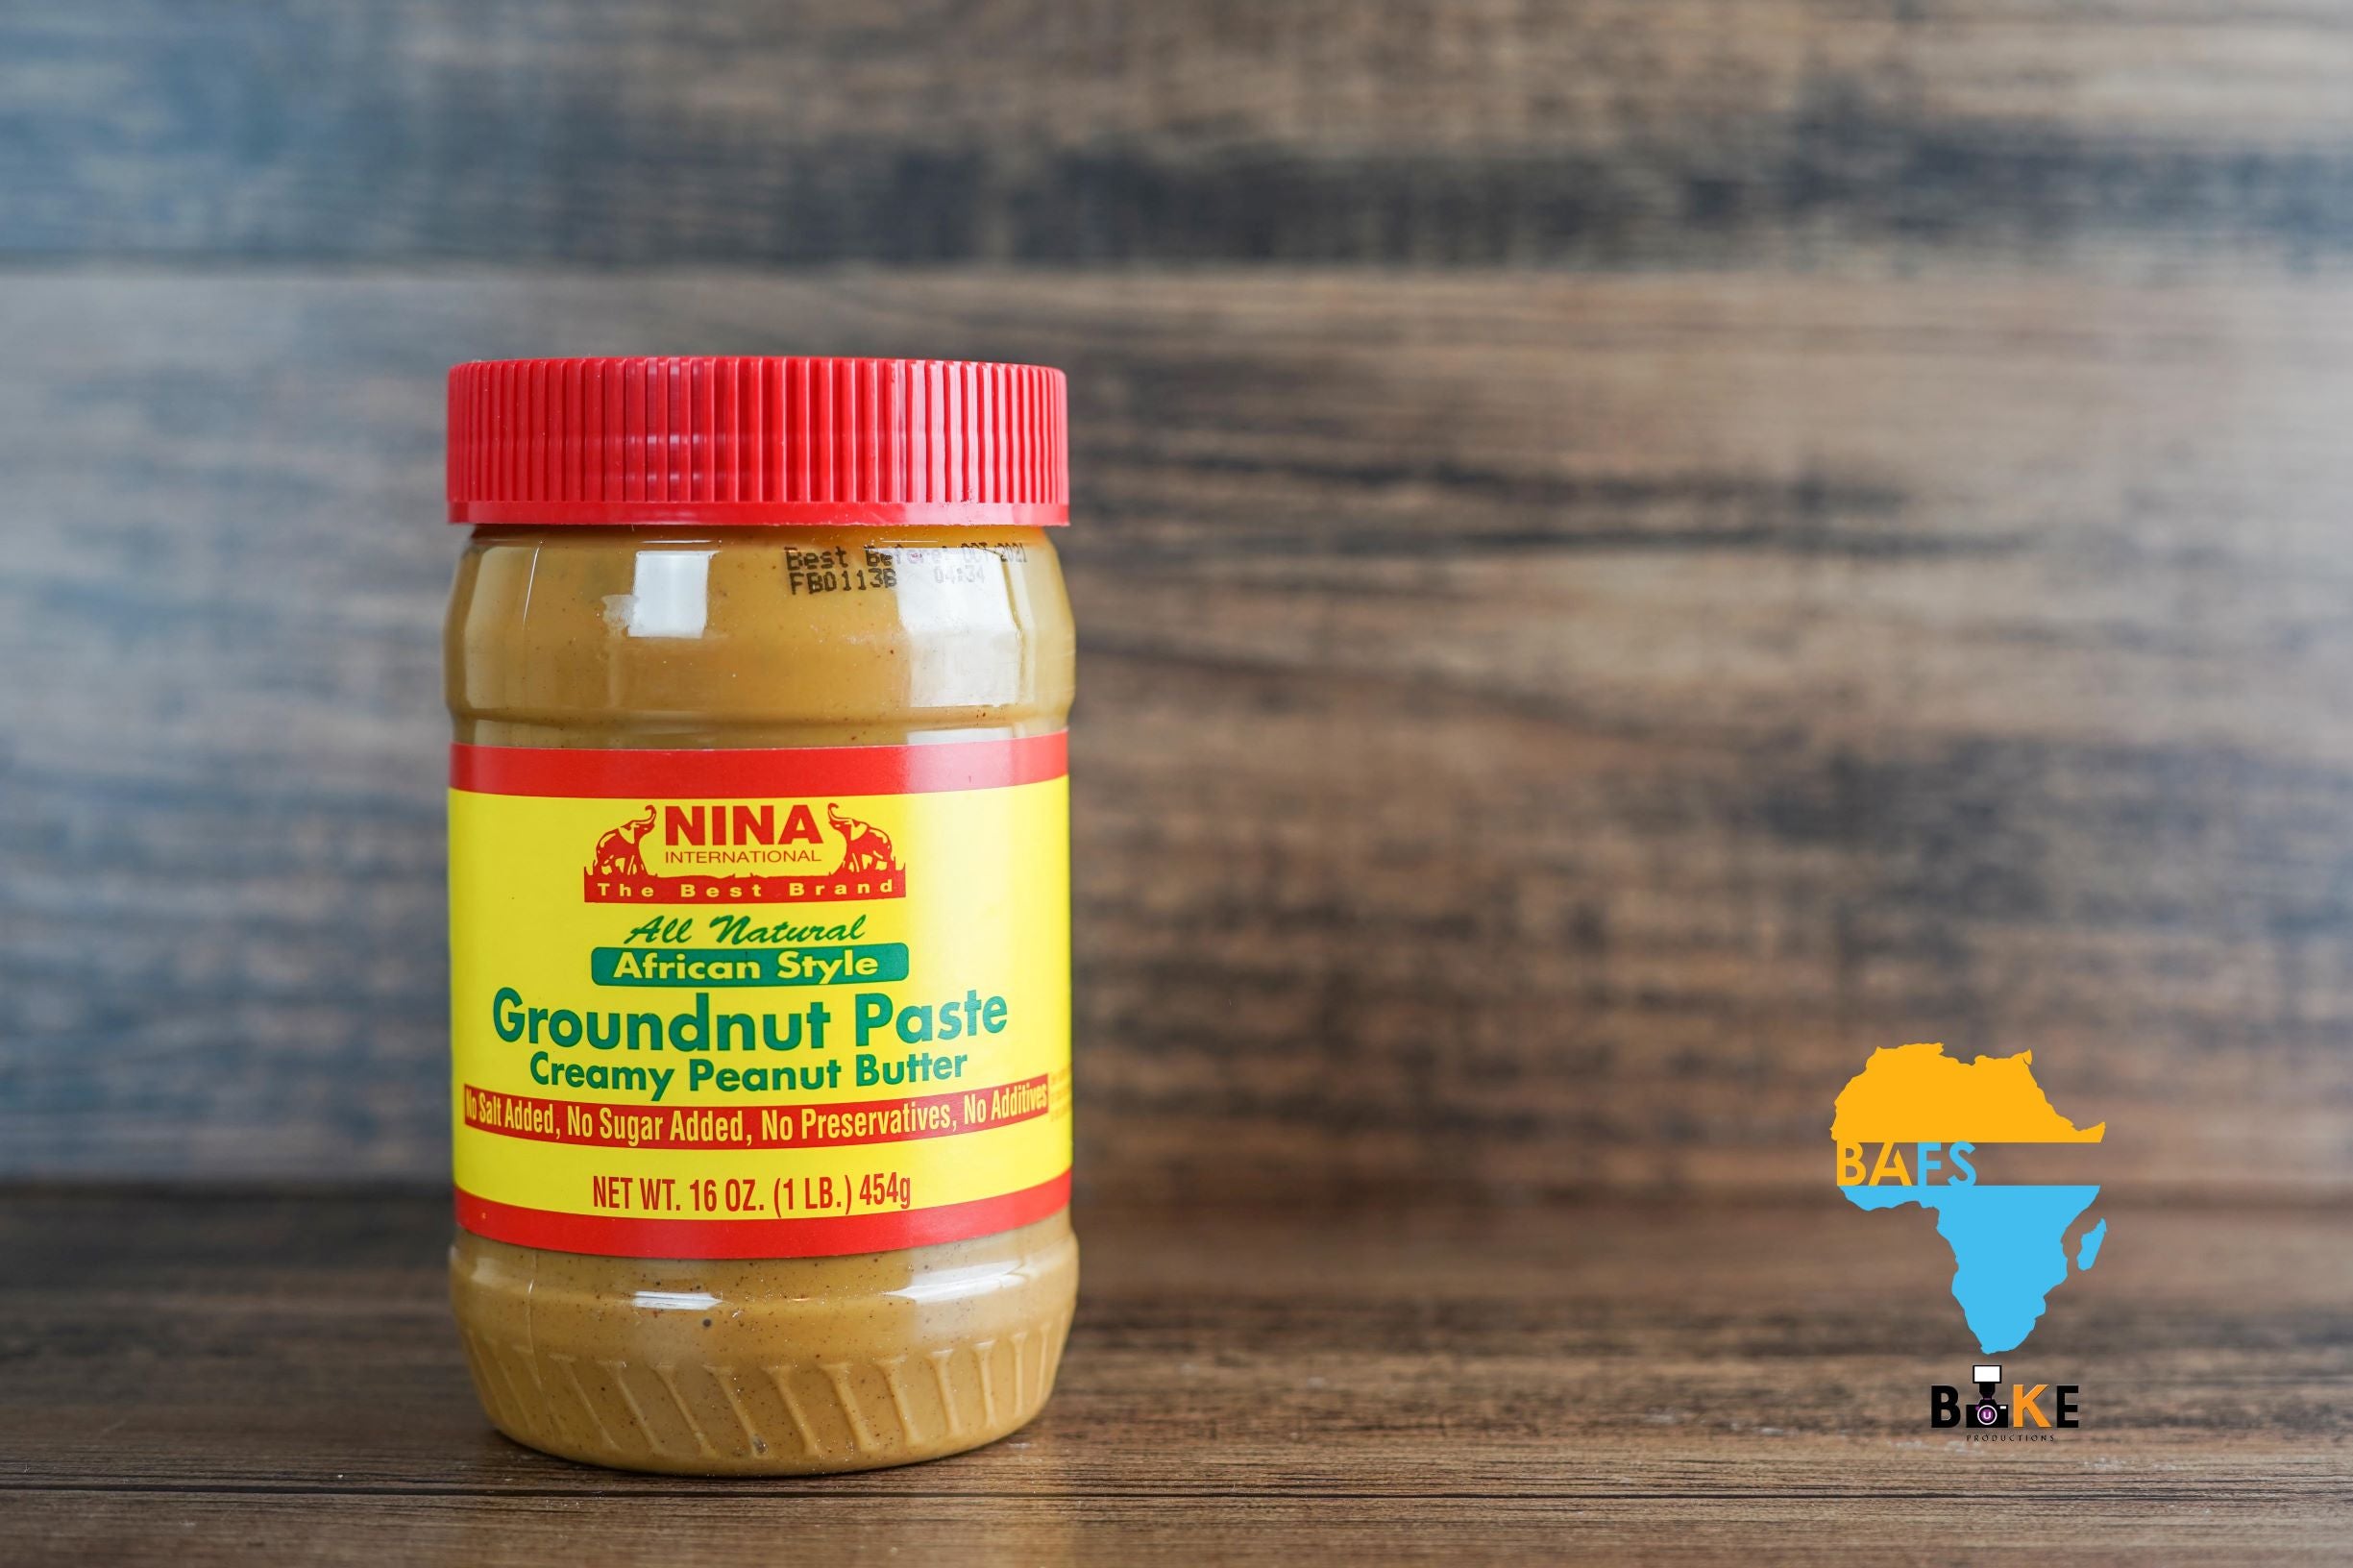 Nina international- All Natural African Style Groundnut Paste Creamy Peanut Butter -16 OZ